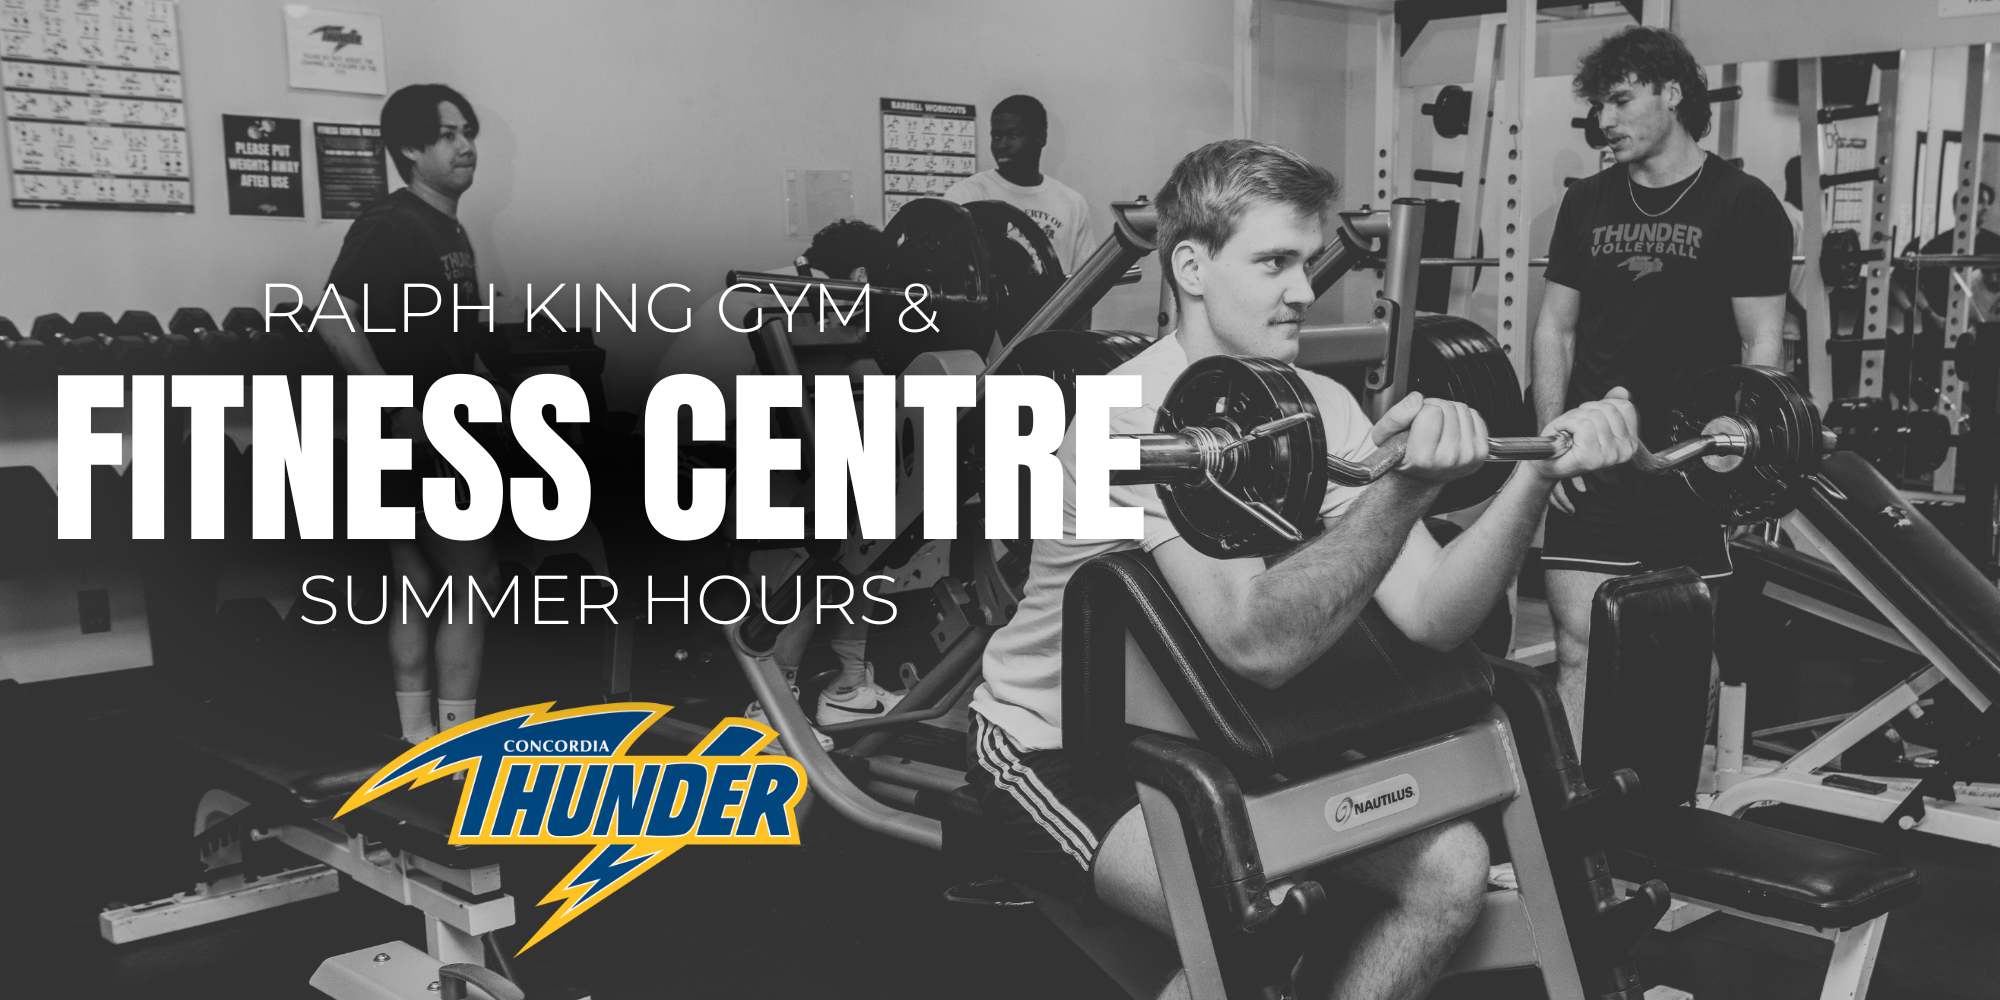 RK Gym & Fitness Centre Summer Hours